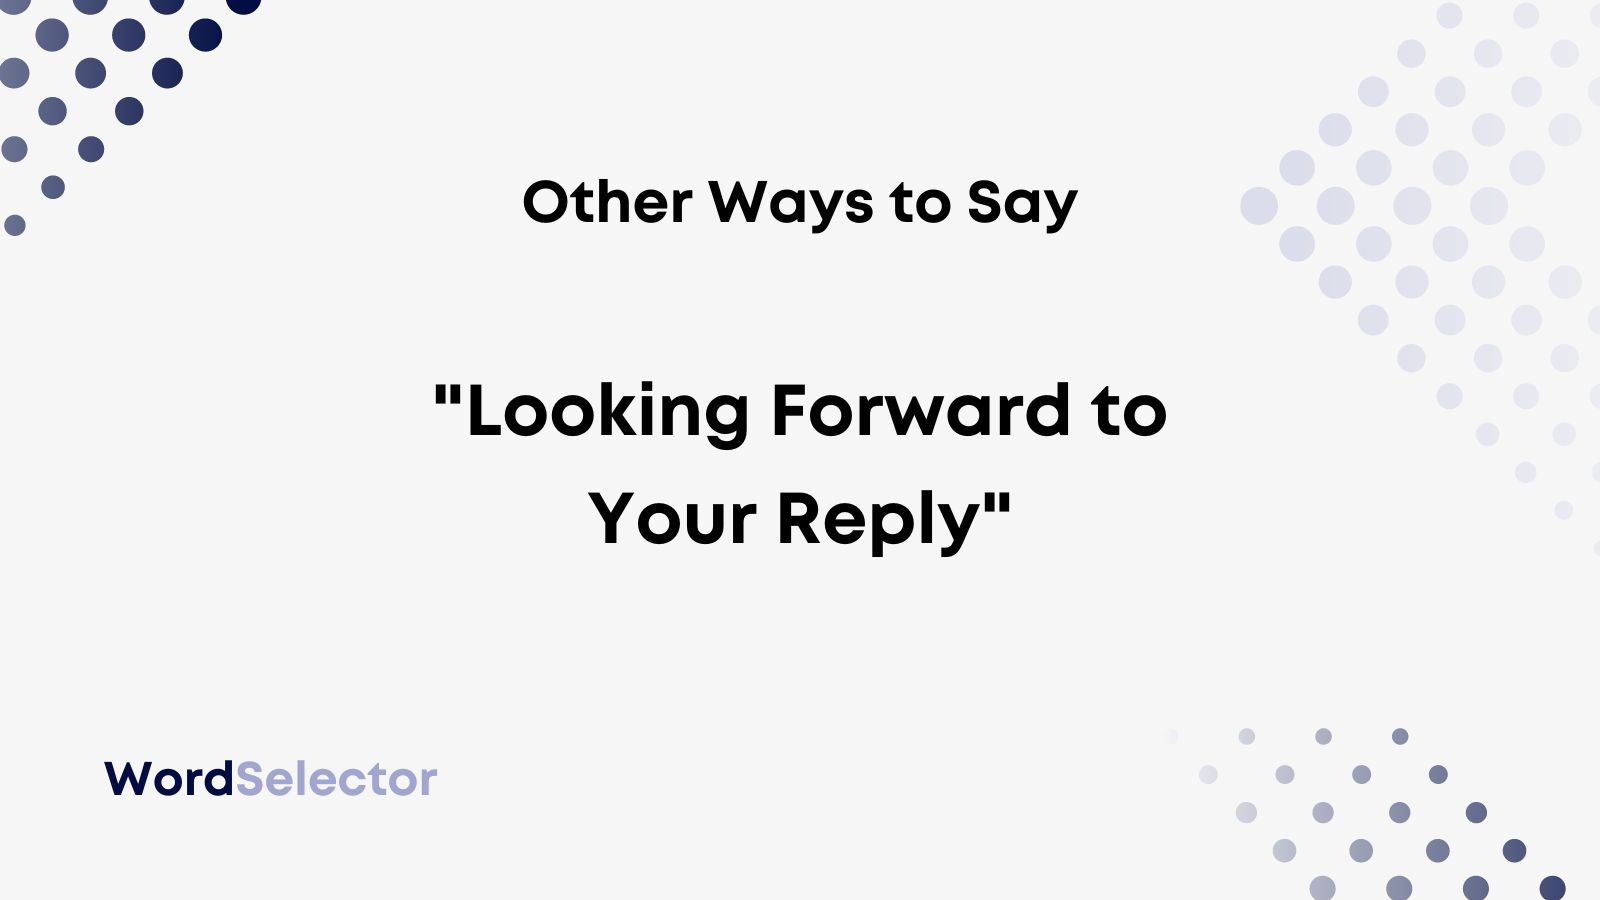 14 Other Ways to Say “Looking Forward to Your Reply” - WordSelector